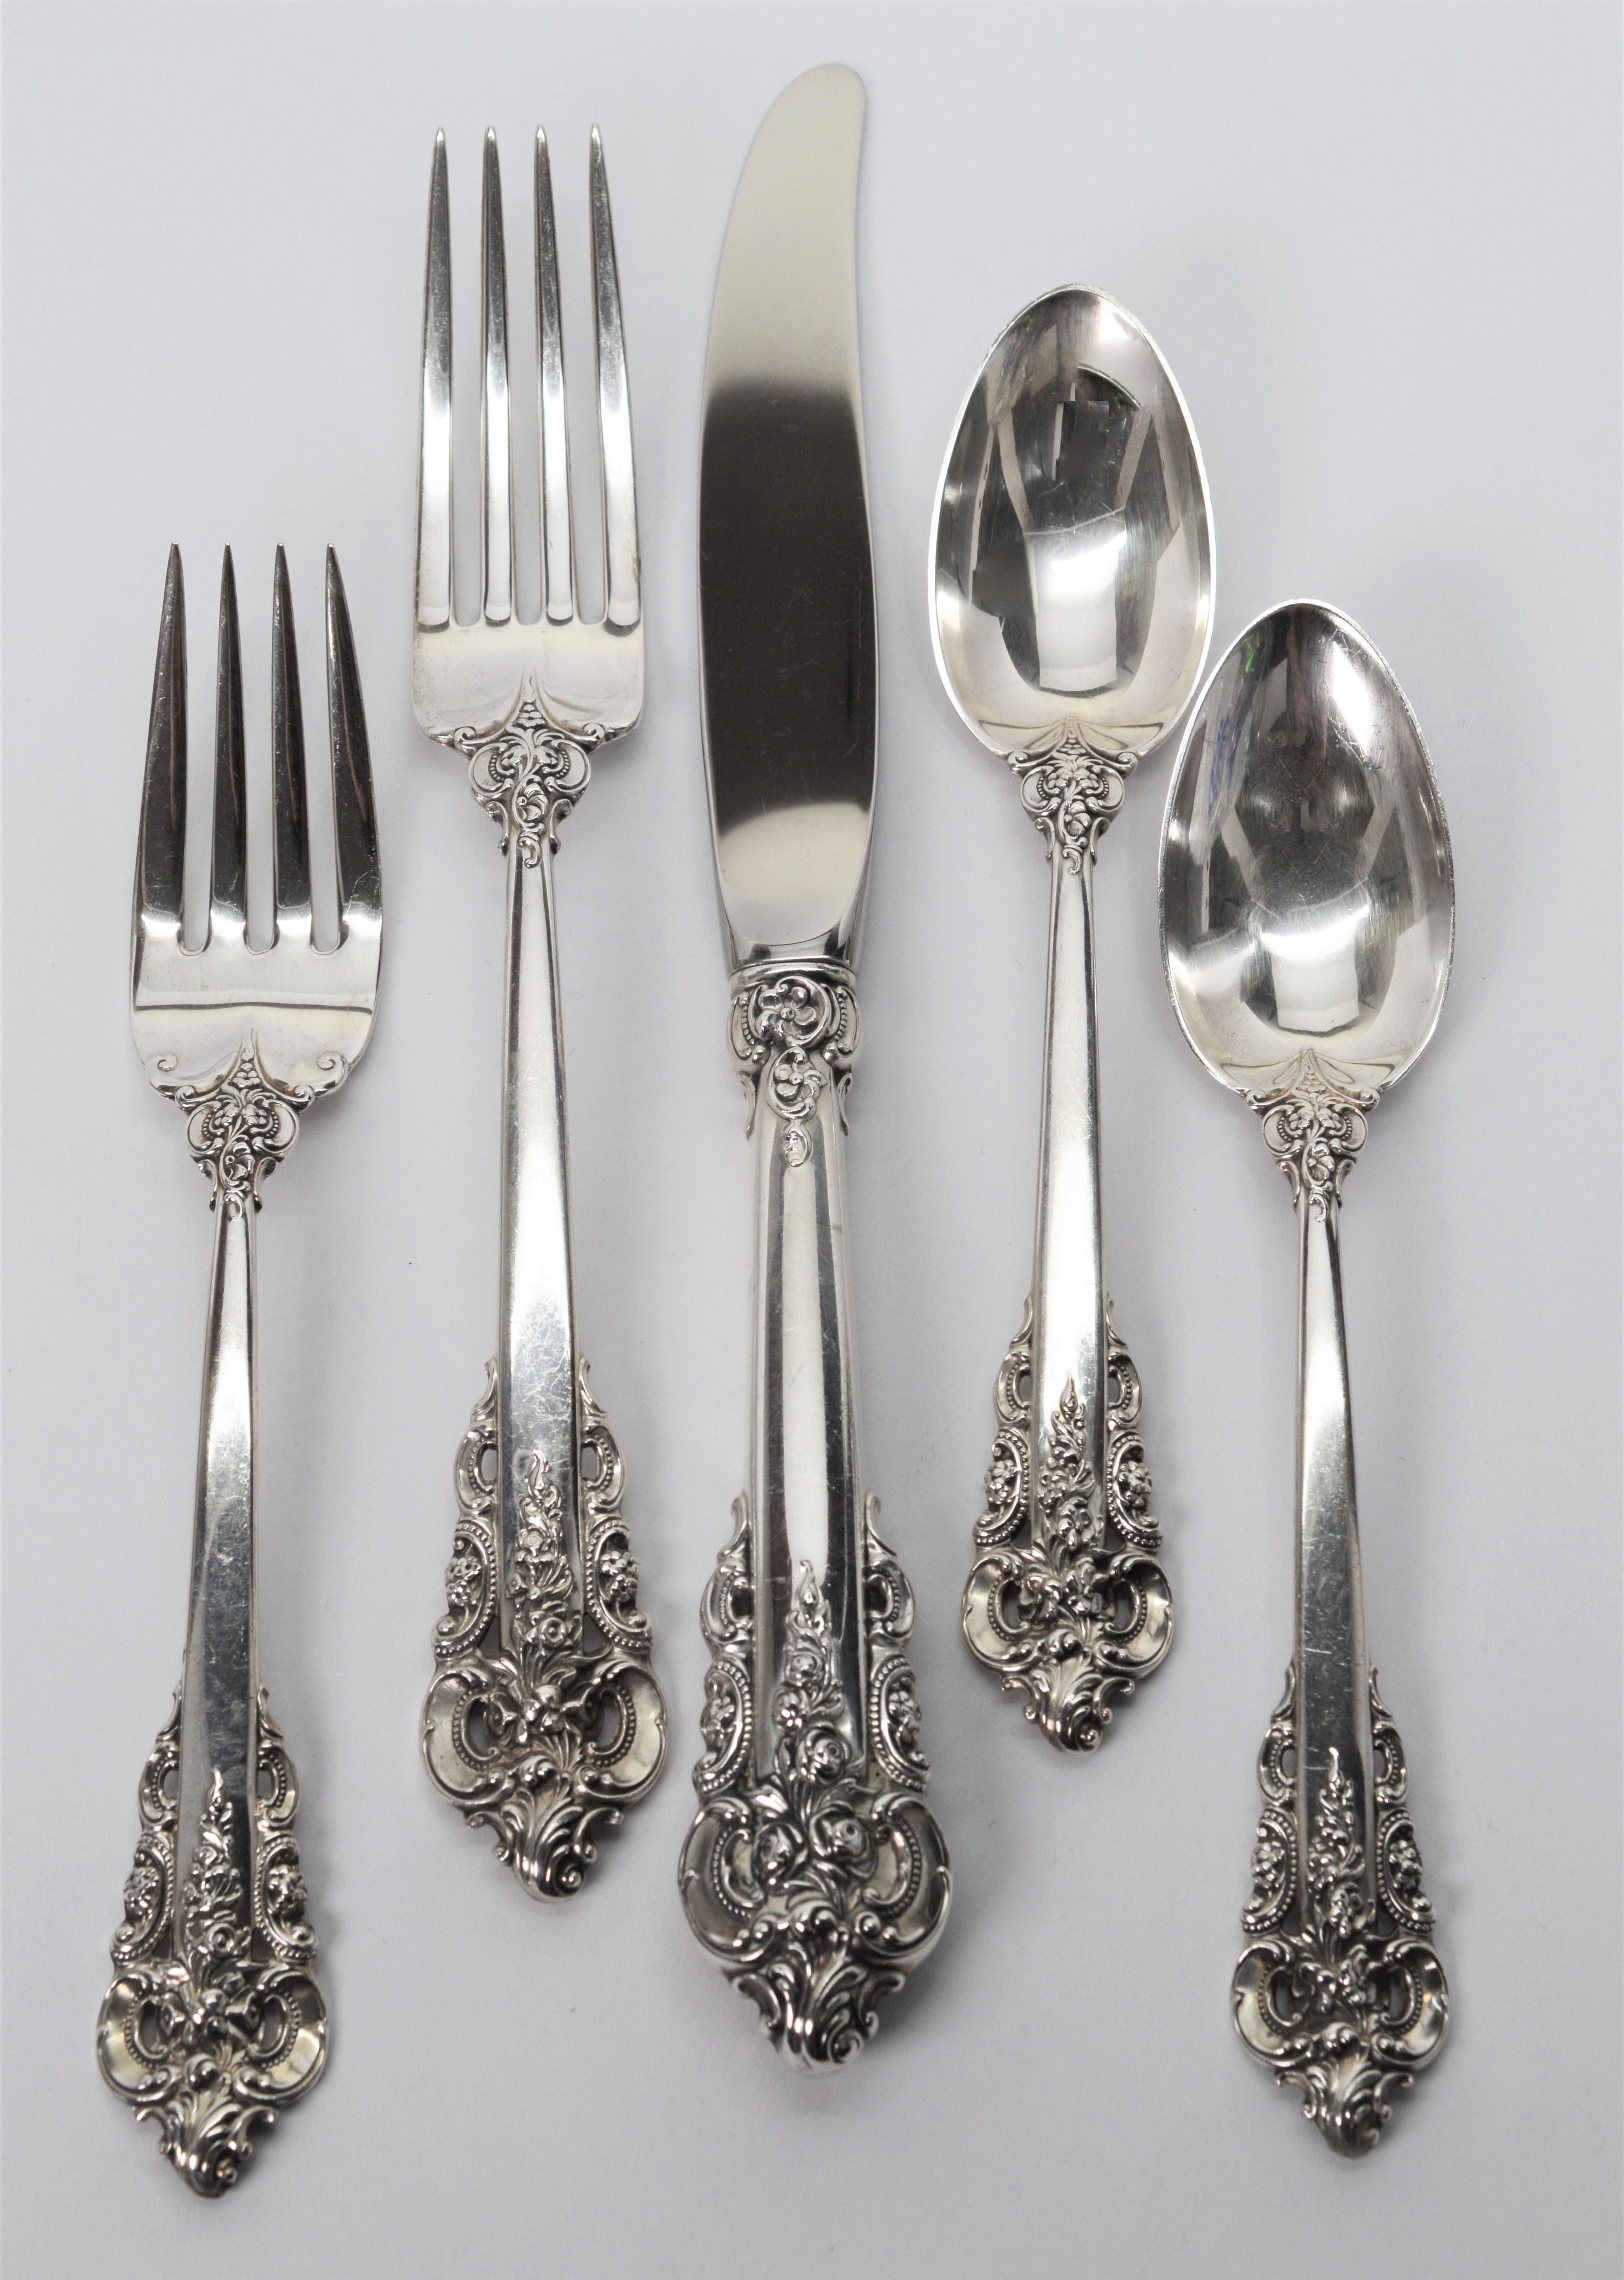 Wallace Grand Baroque Sterling Silver Flatware, Five Piece Place Setting In Good Condition For Sale In Mount Kisco, NY